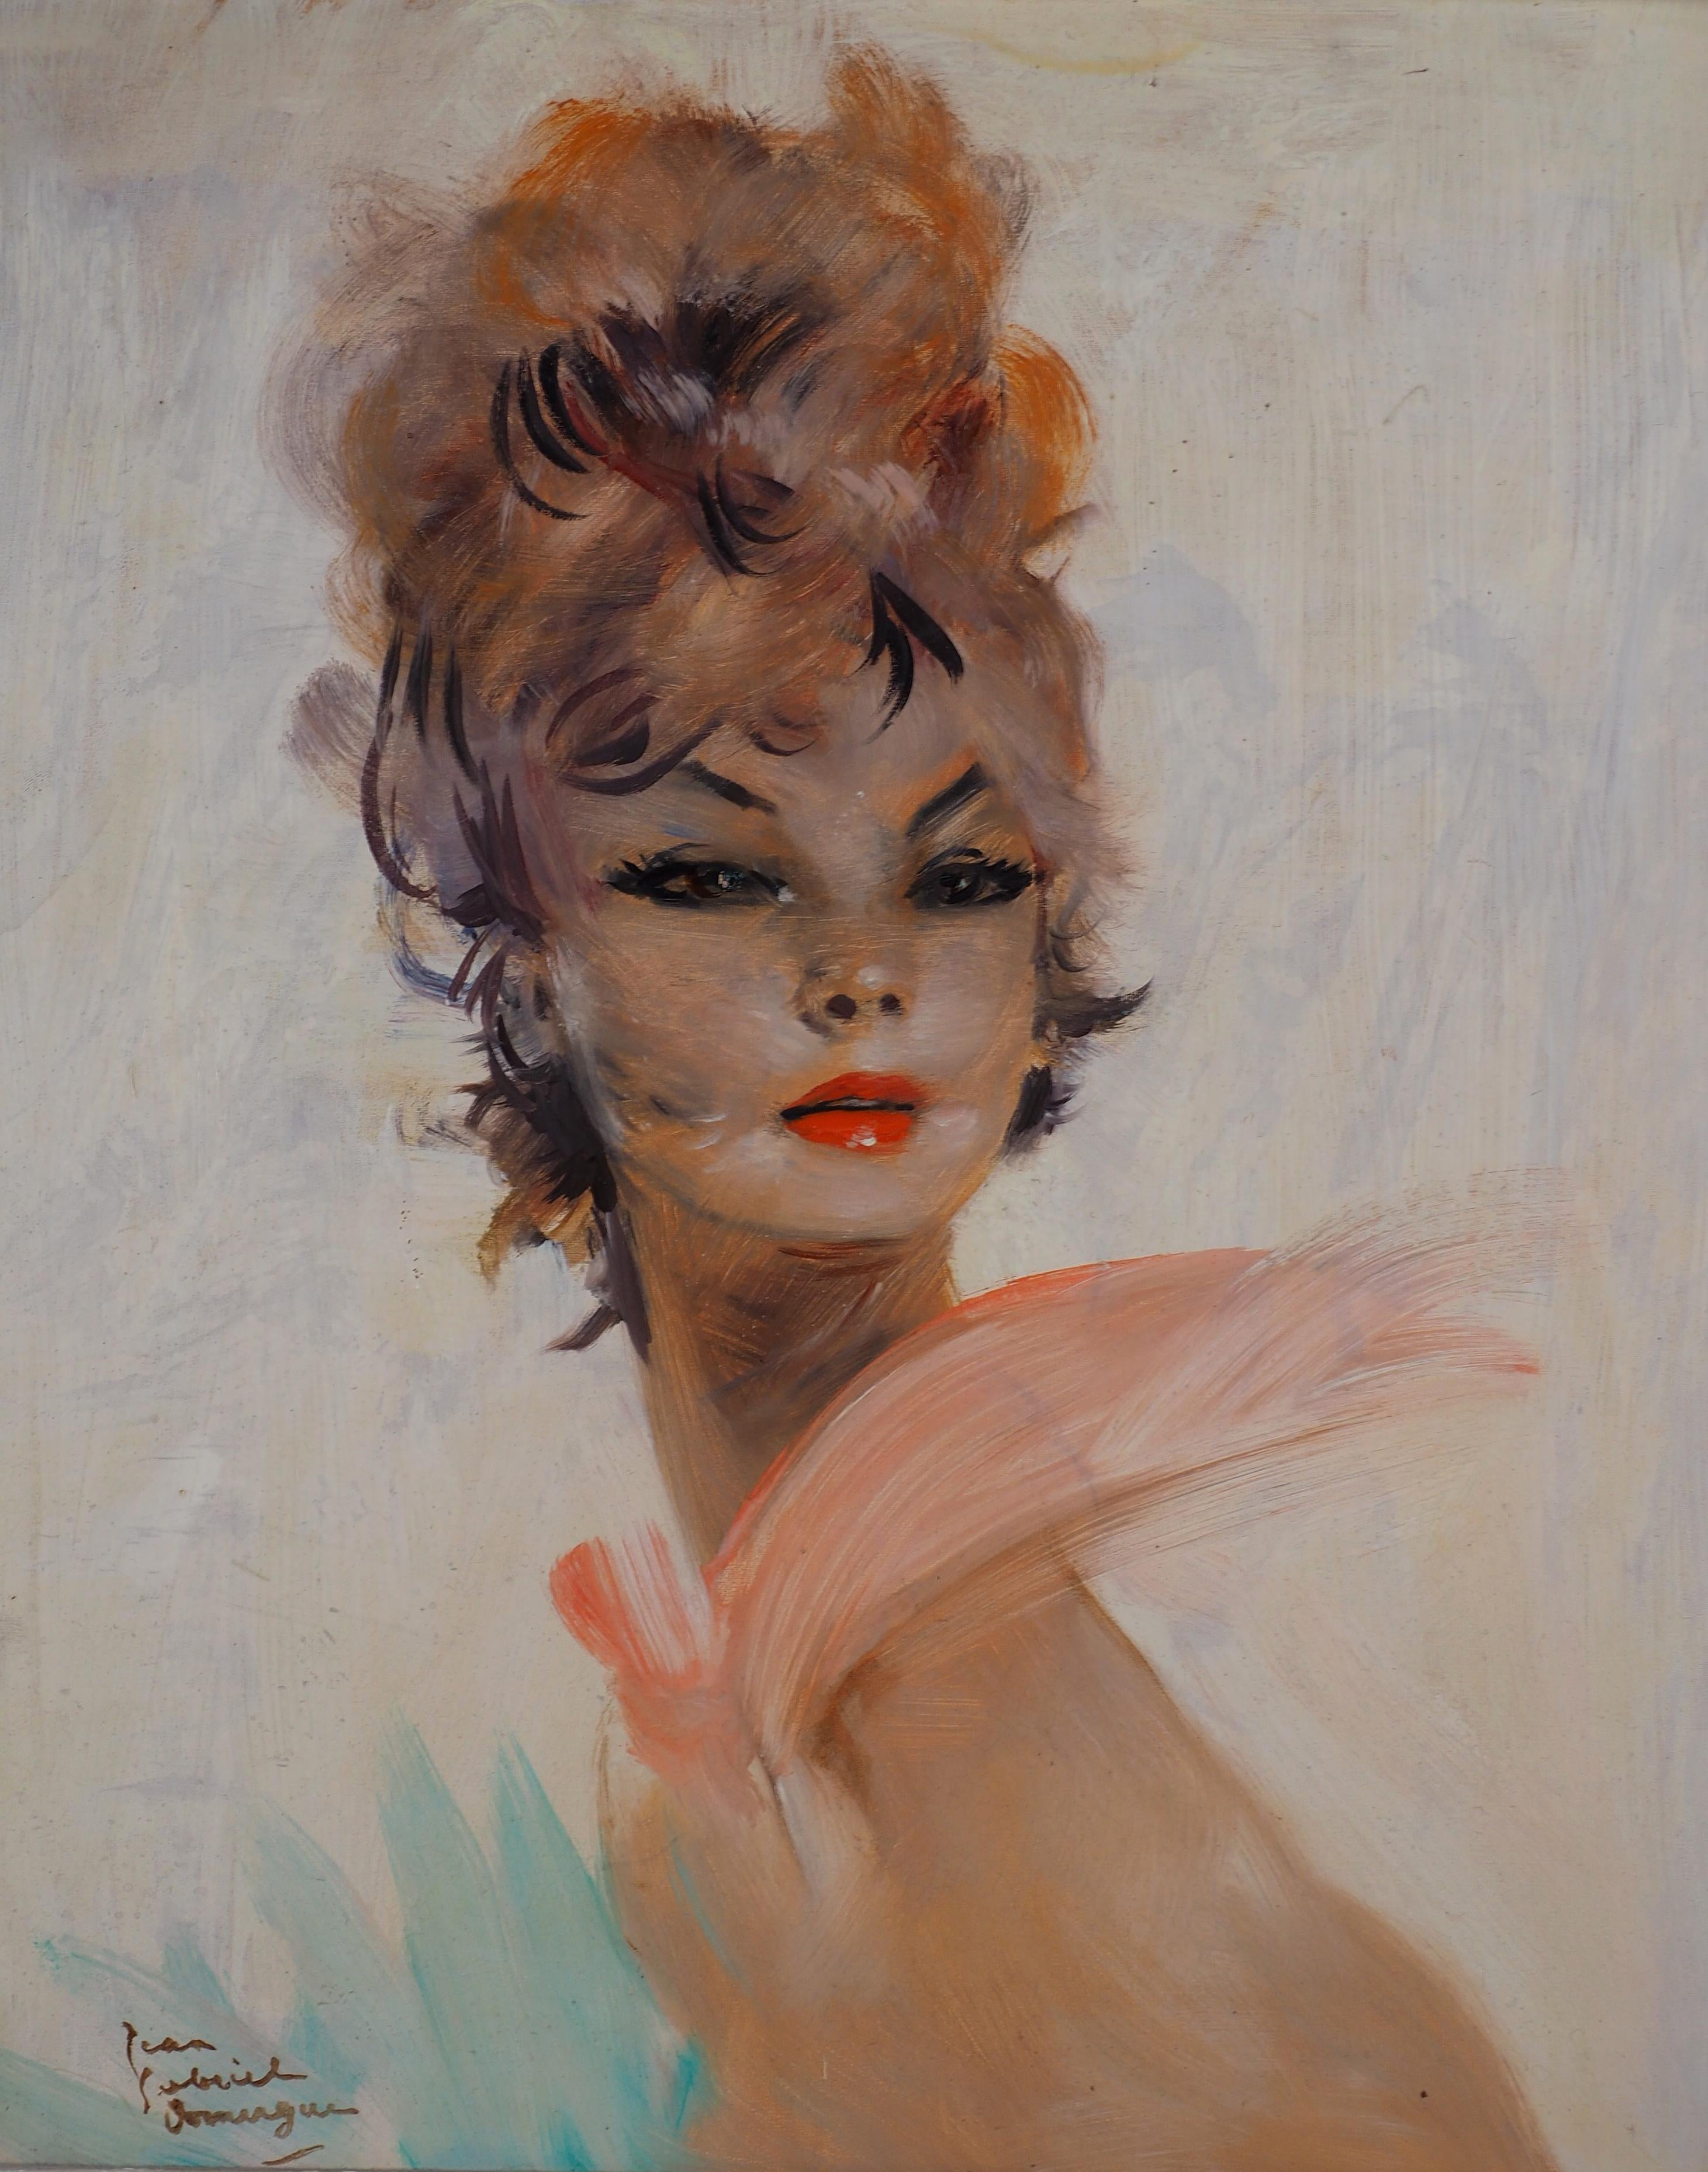 Woman with Ruban - Original Oil on Panel, Handsigned  - Brown Portrait Painting by Jean-Gabriel Domergue